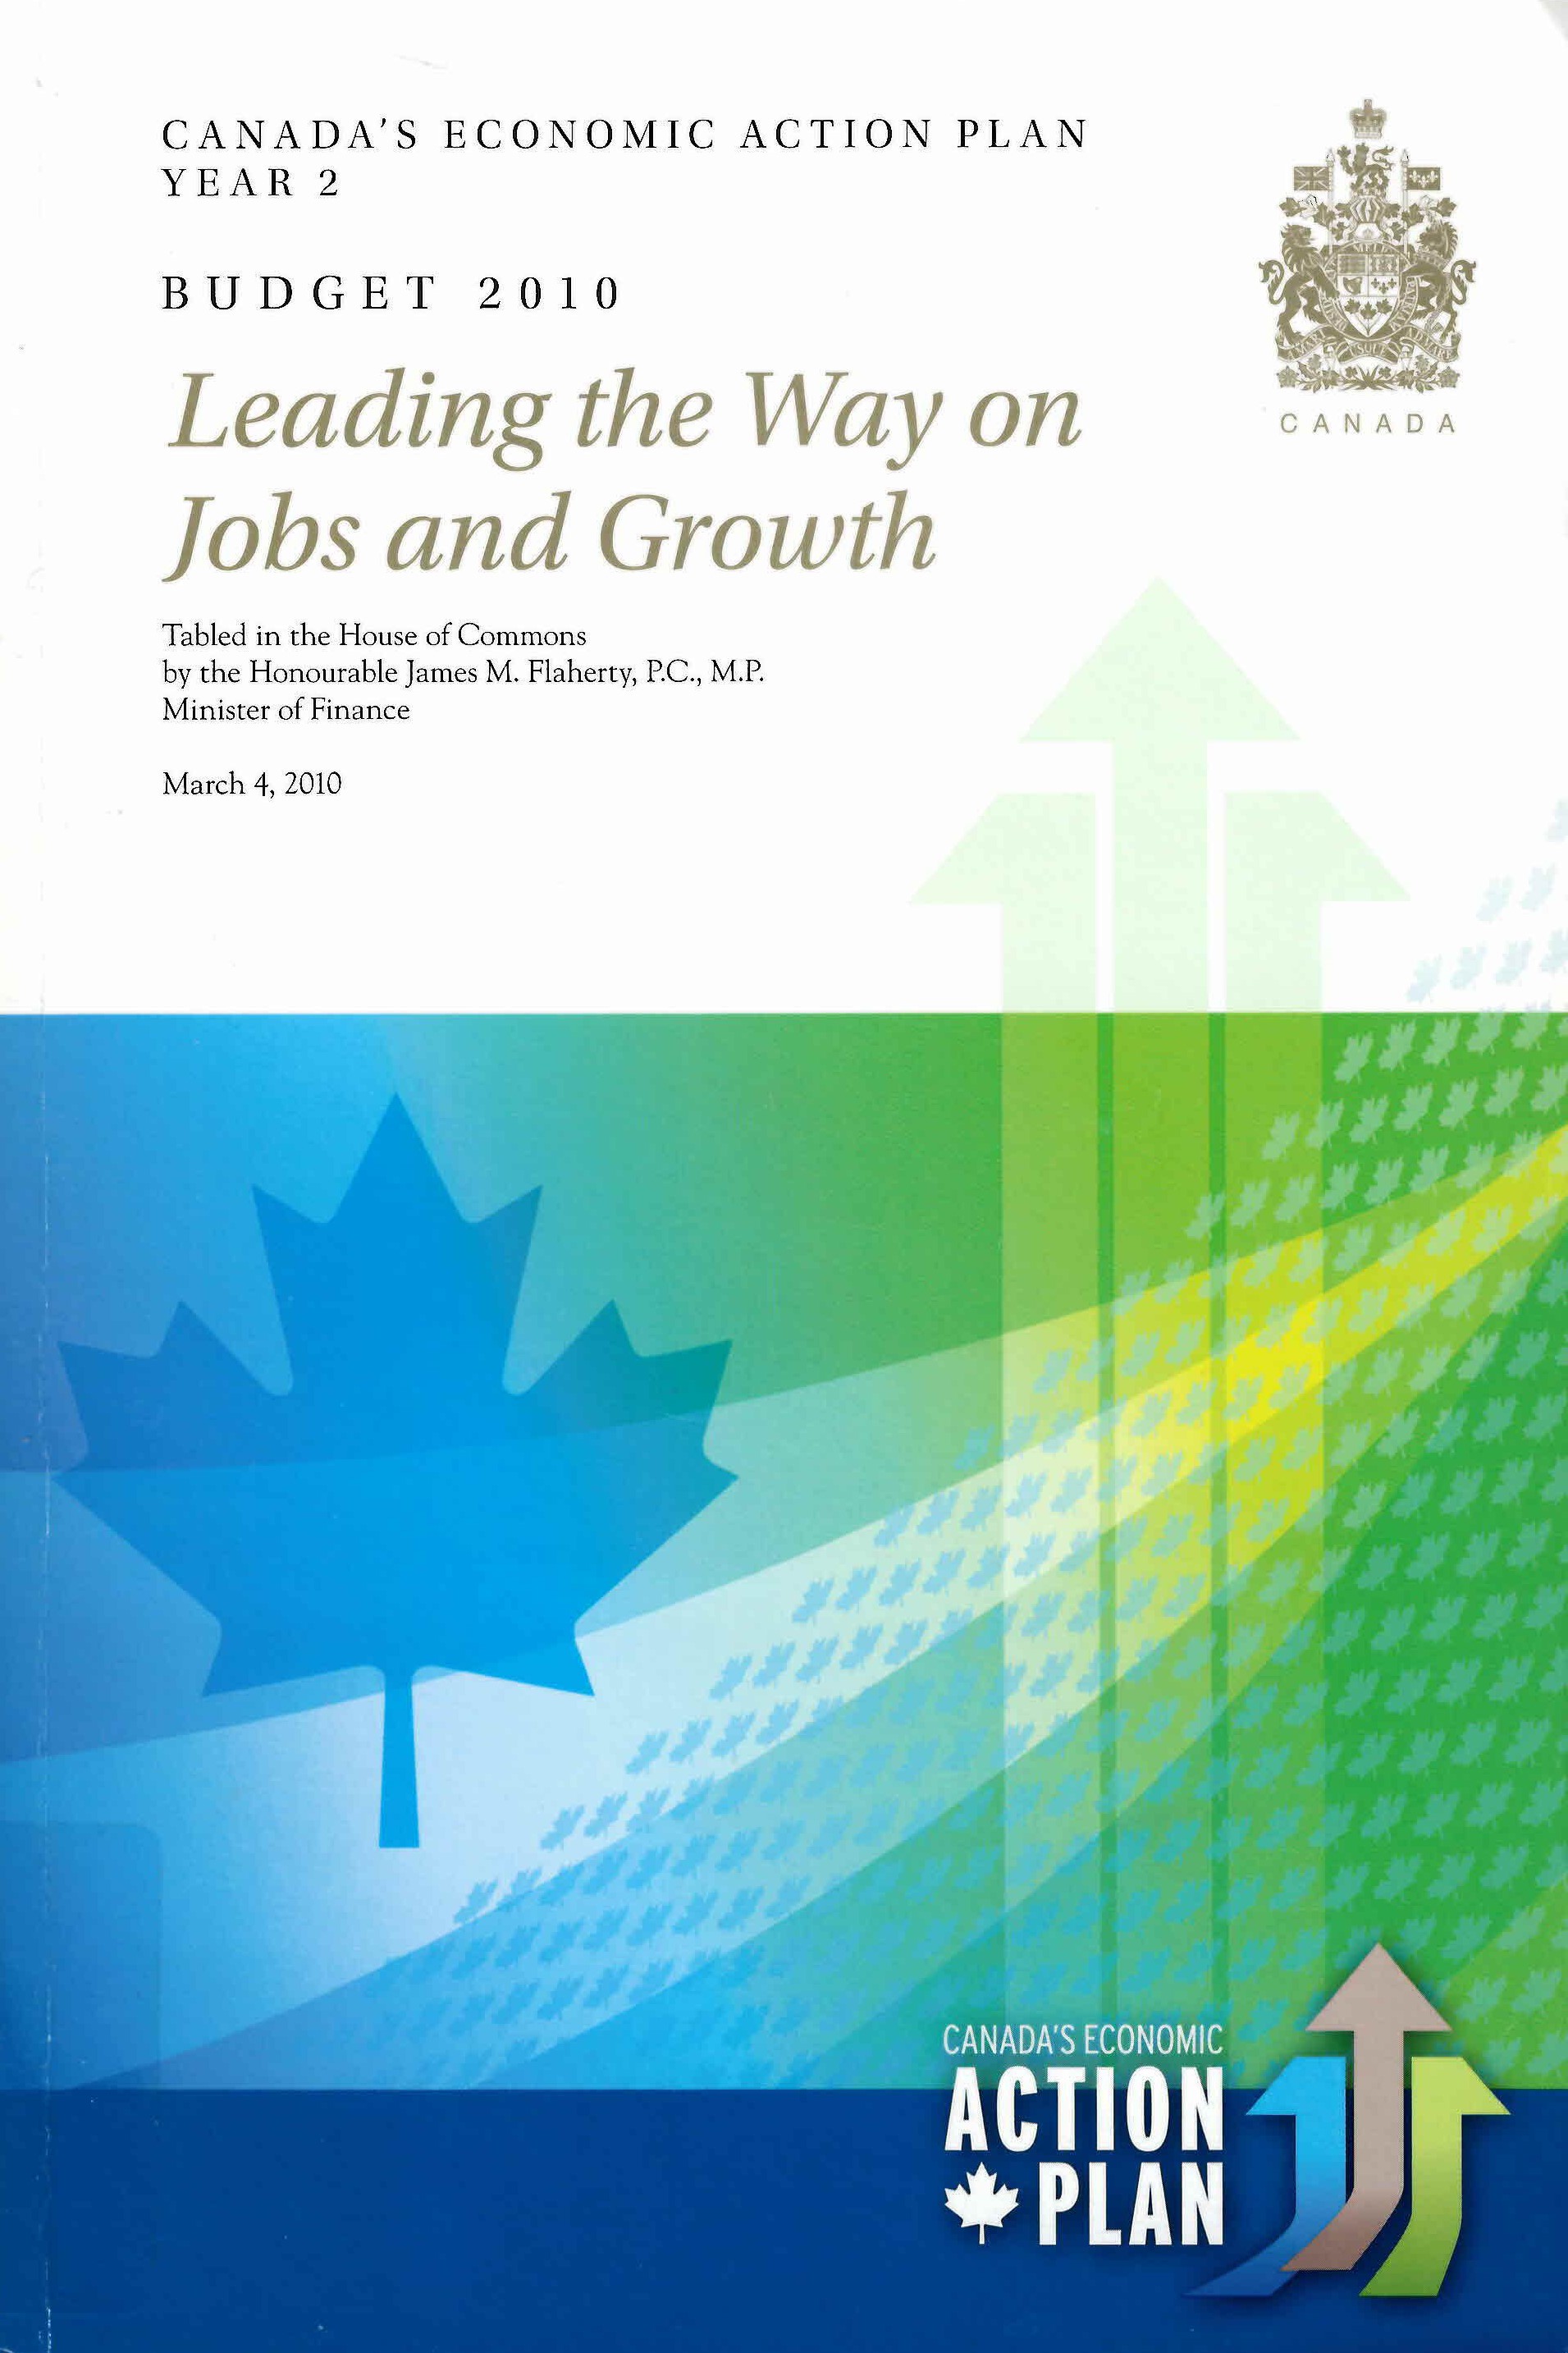 Canada's economic action plan, year 2 : budget 2010 : leading the way on jobs and growth